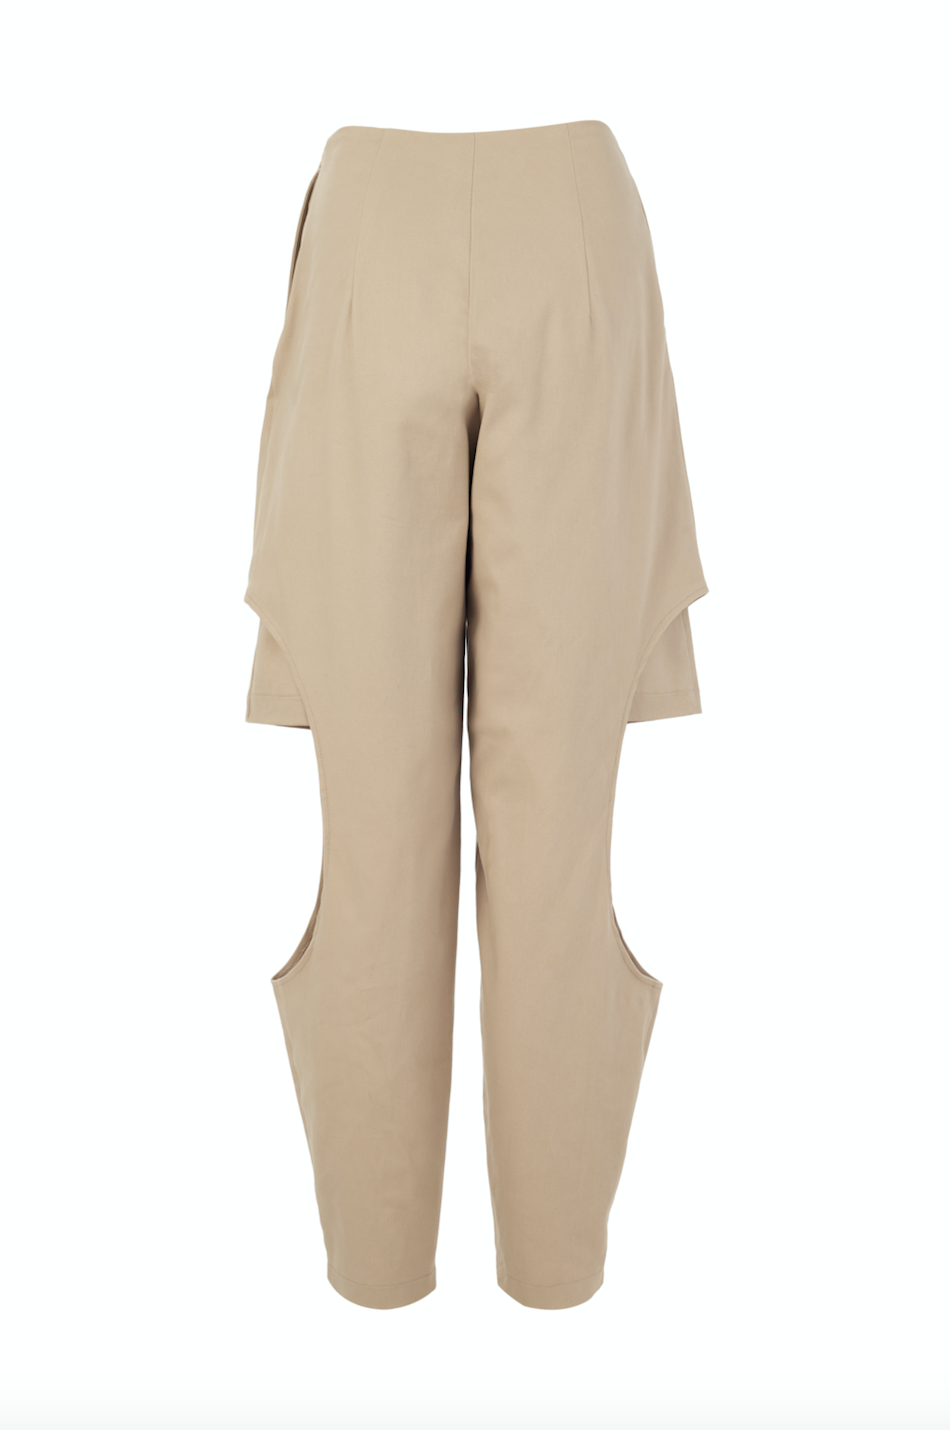 Nude gabardine two layered pant/shorts with side cut outs.